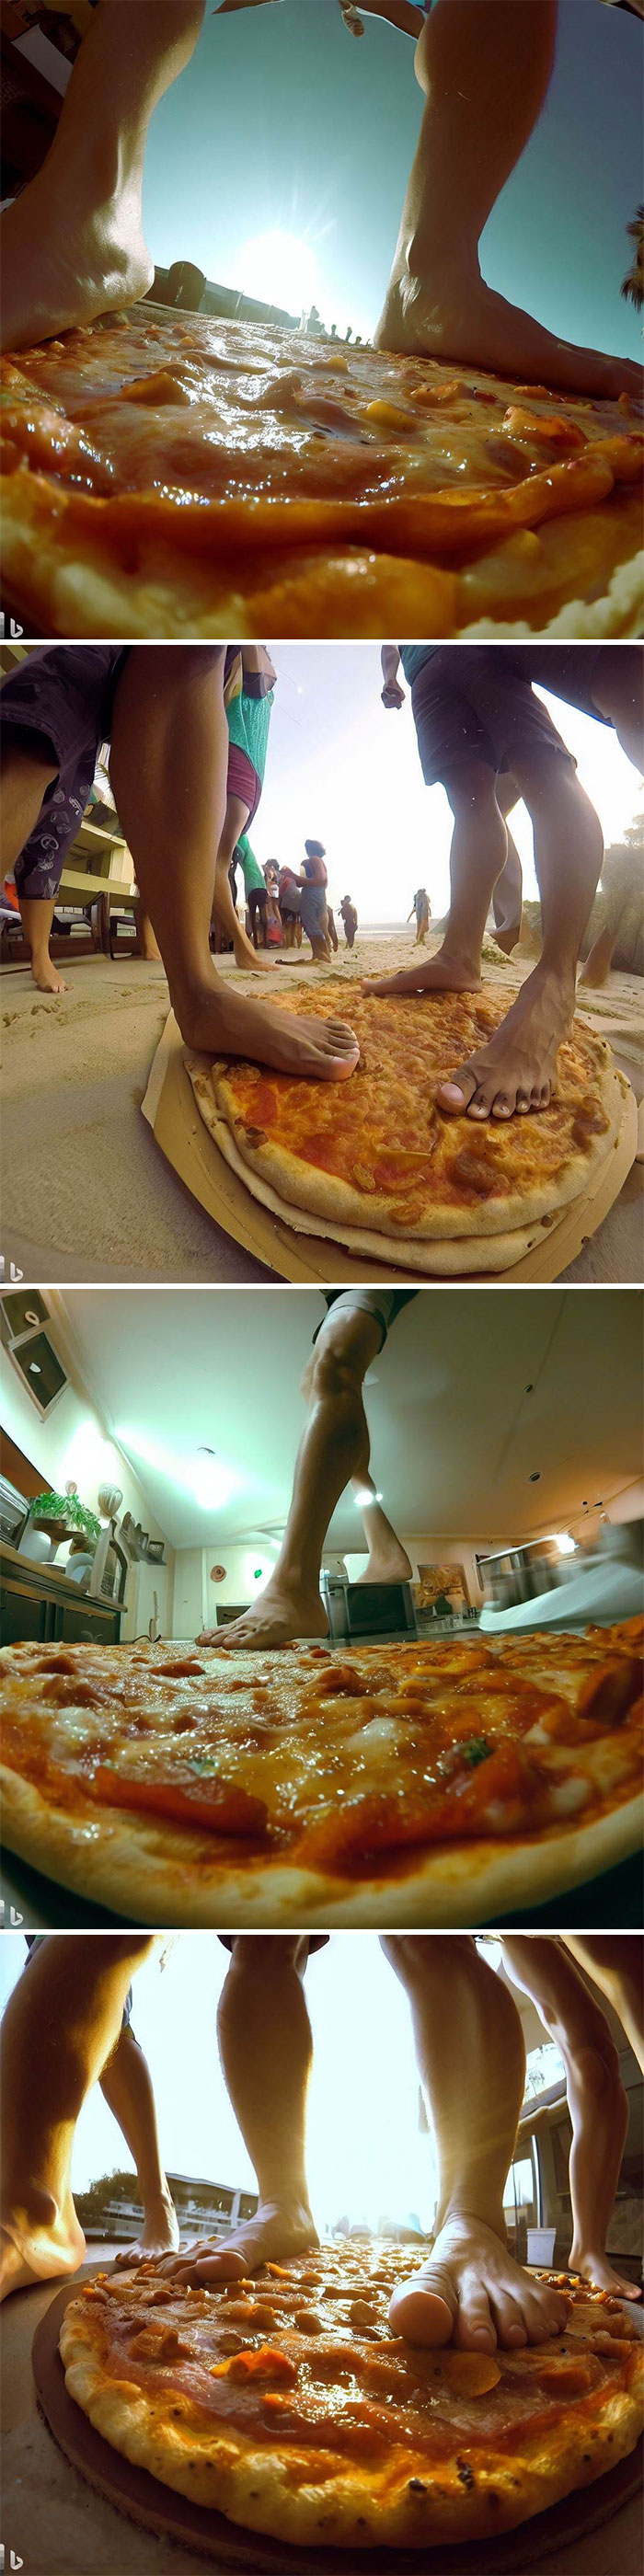 Gopro Footage Of People Standing Barefoot On Pizza